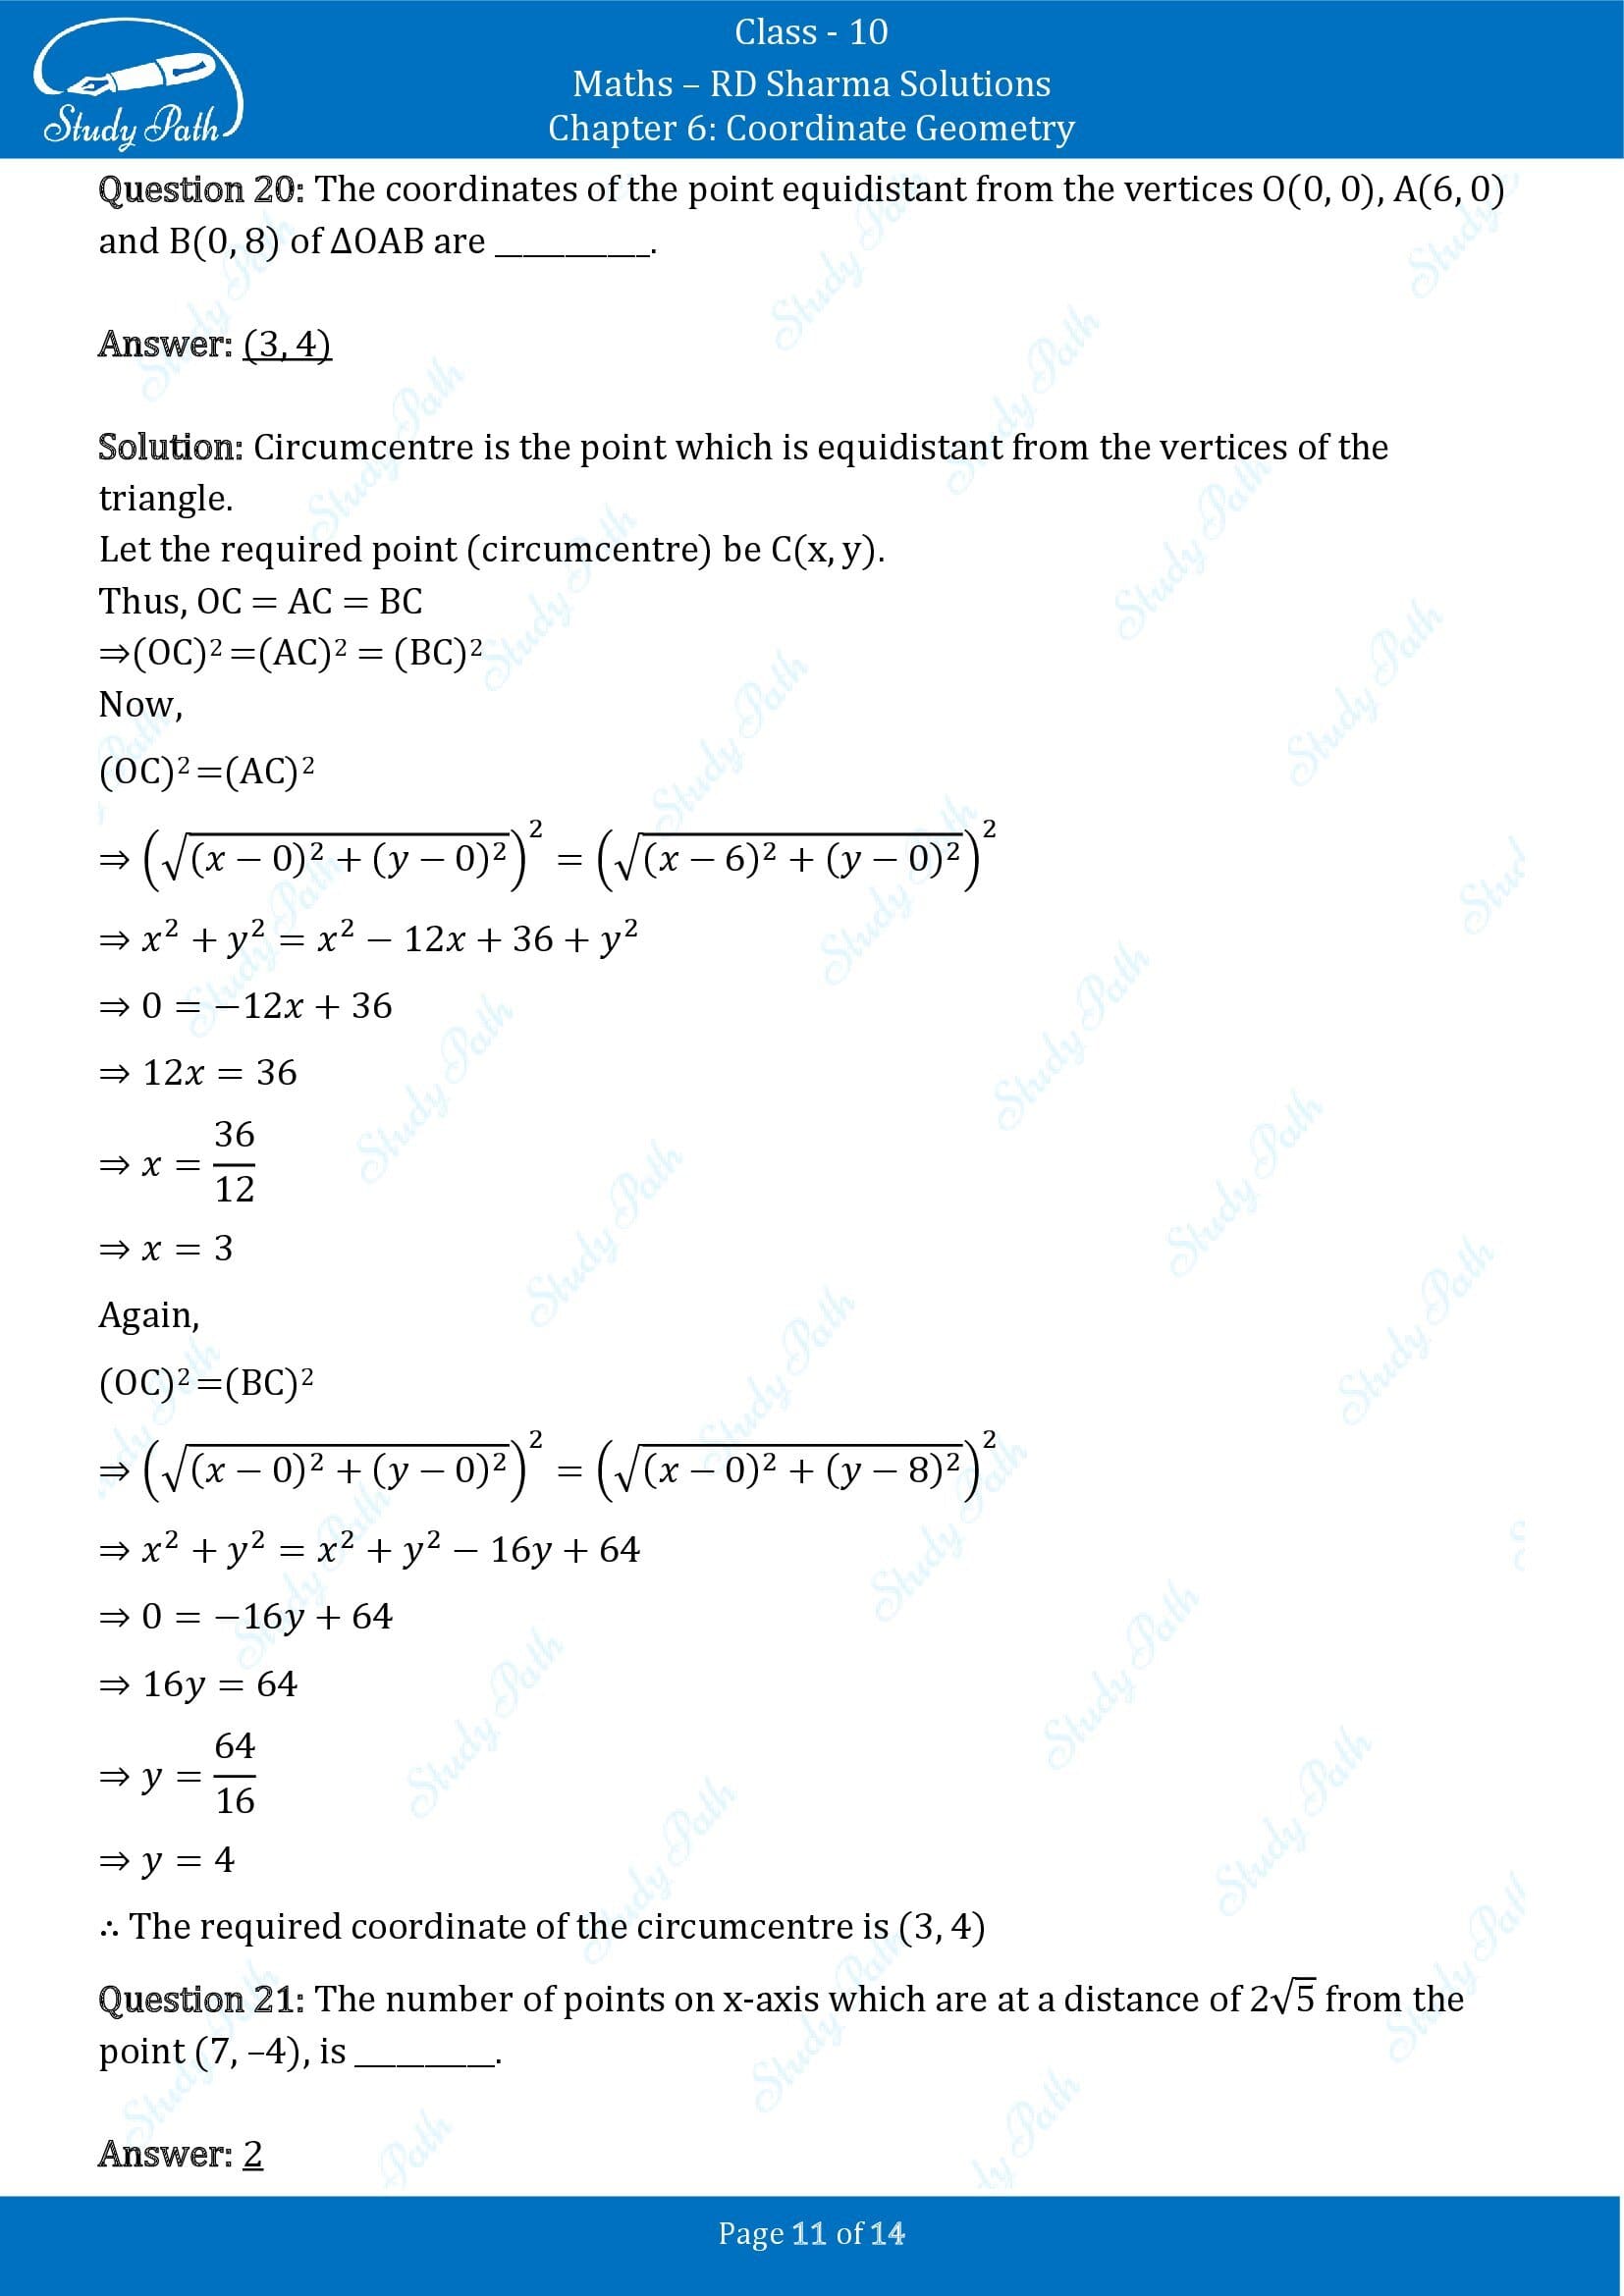 RD Sharma Solutions Class 10 Chapter 6 Coordinate Geometry Fill in the Blank Type Questions FBQs 00011